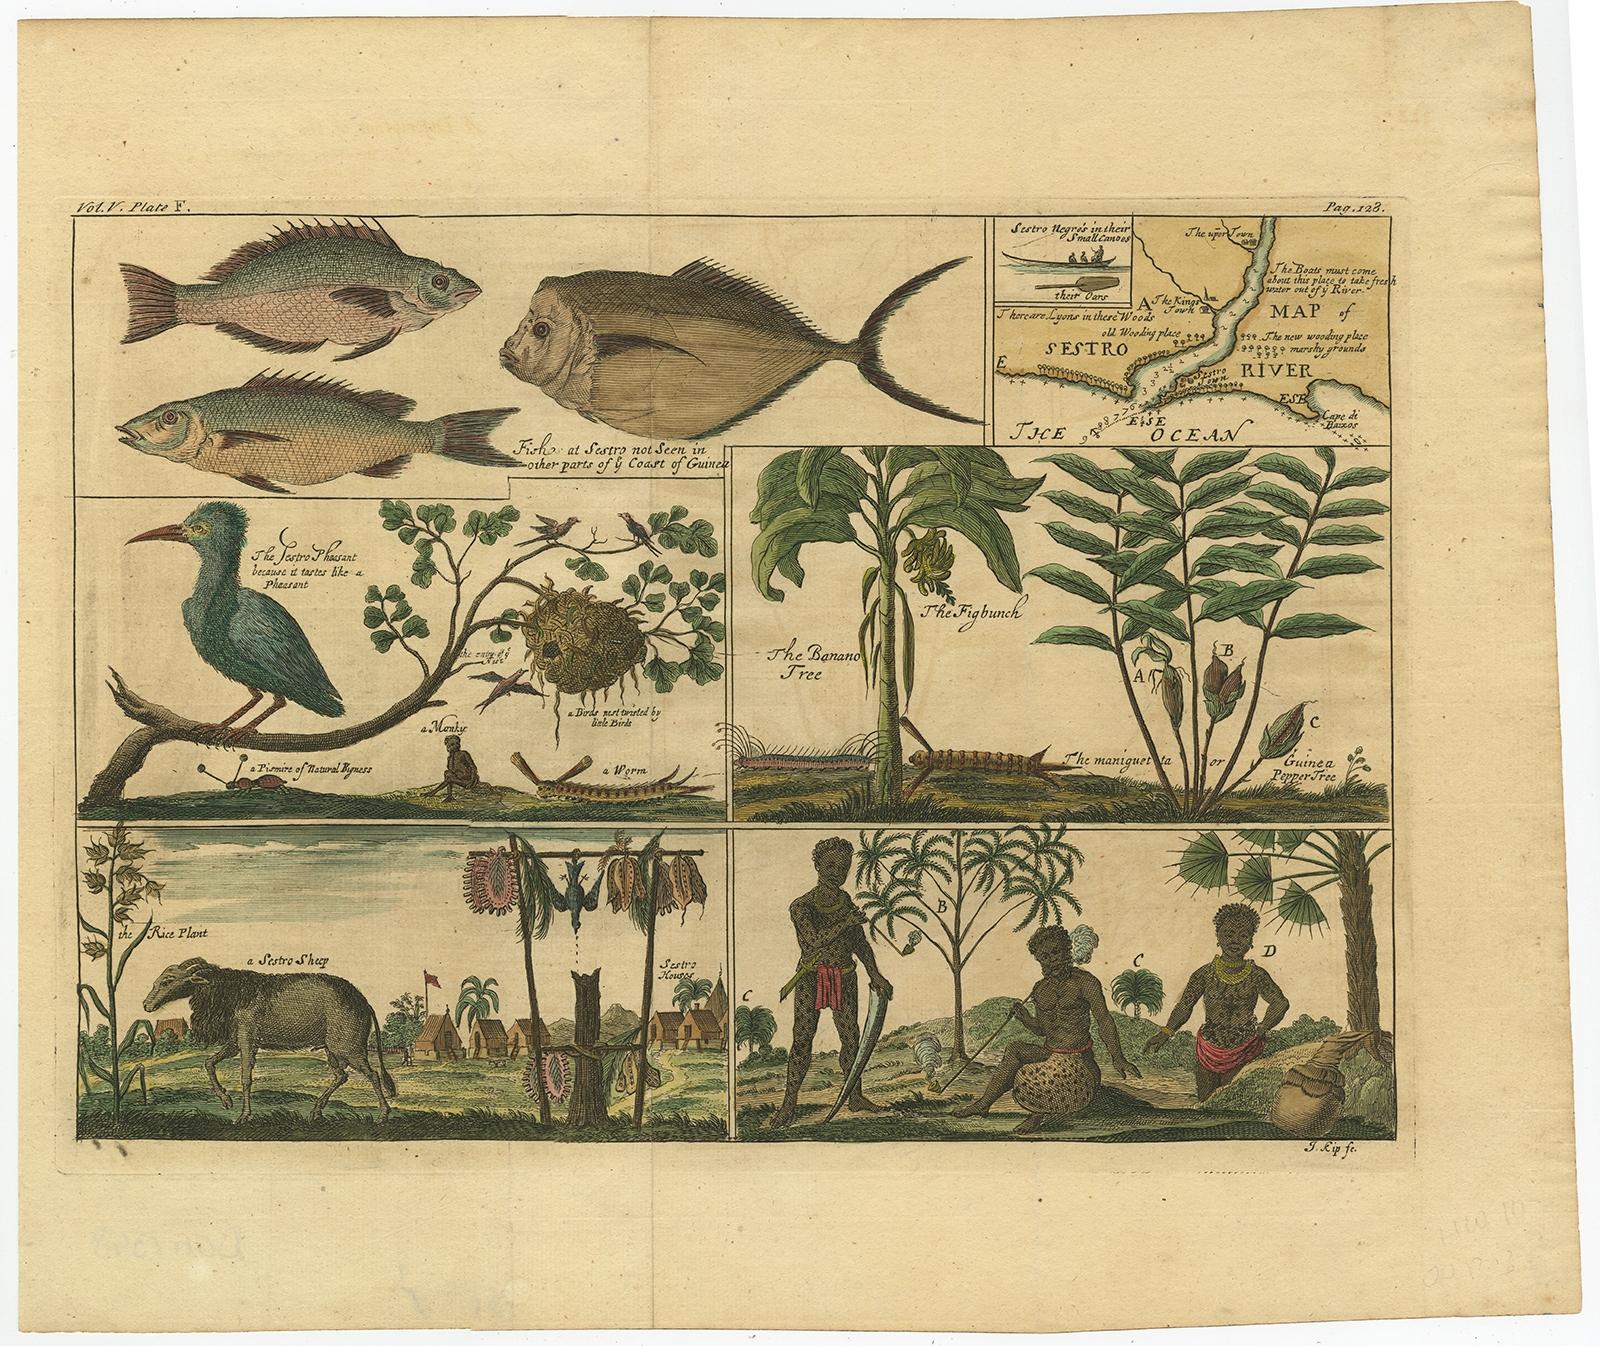 Description: Antique print, titled: 'A map of Sestro River (…).' - This plate shows Fish, birds, animals and people in the area around the Sestro River, Liberia. Inset; a small map of the mouth of the river. From: 